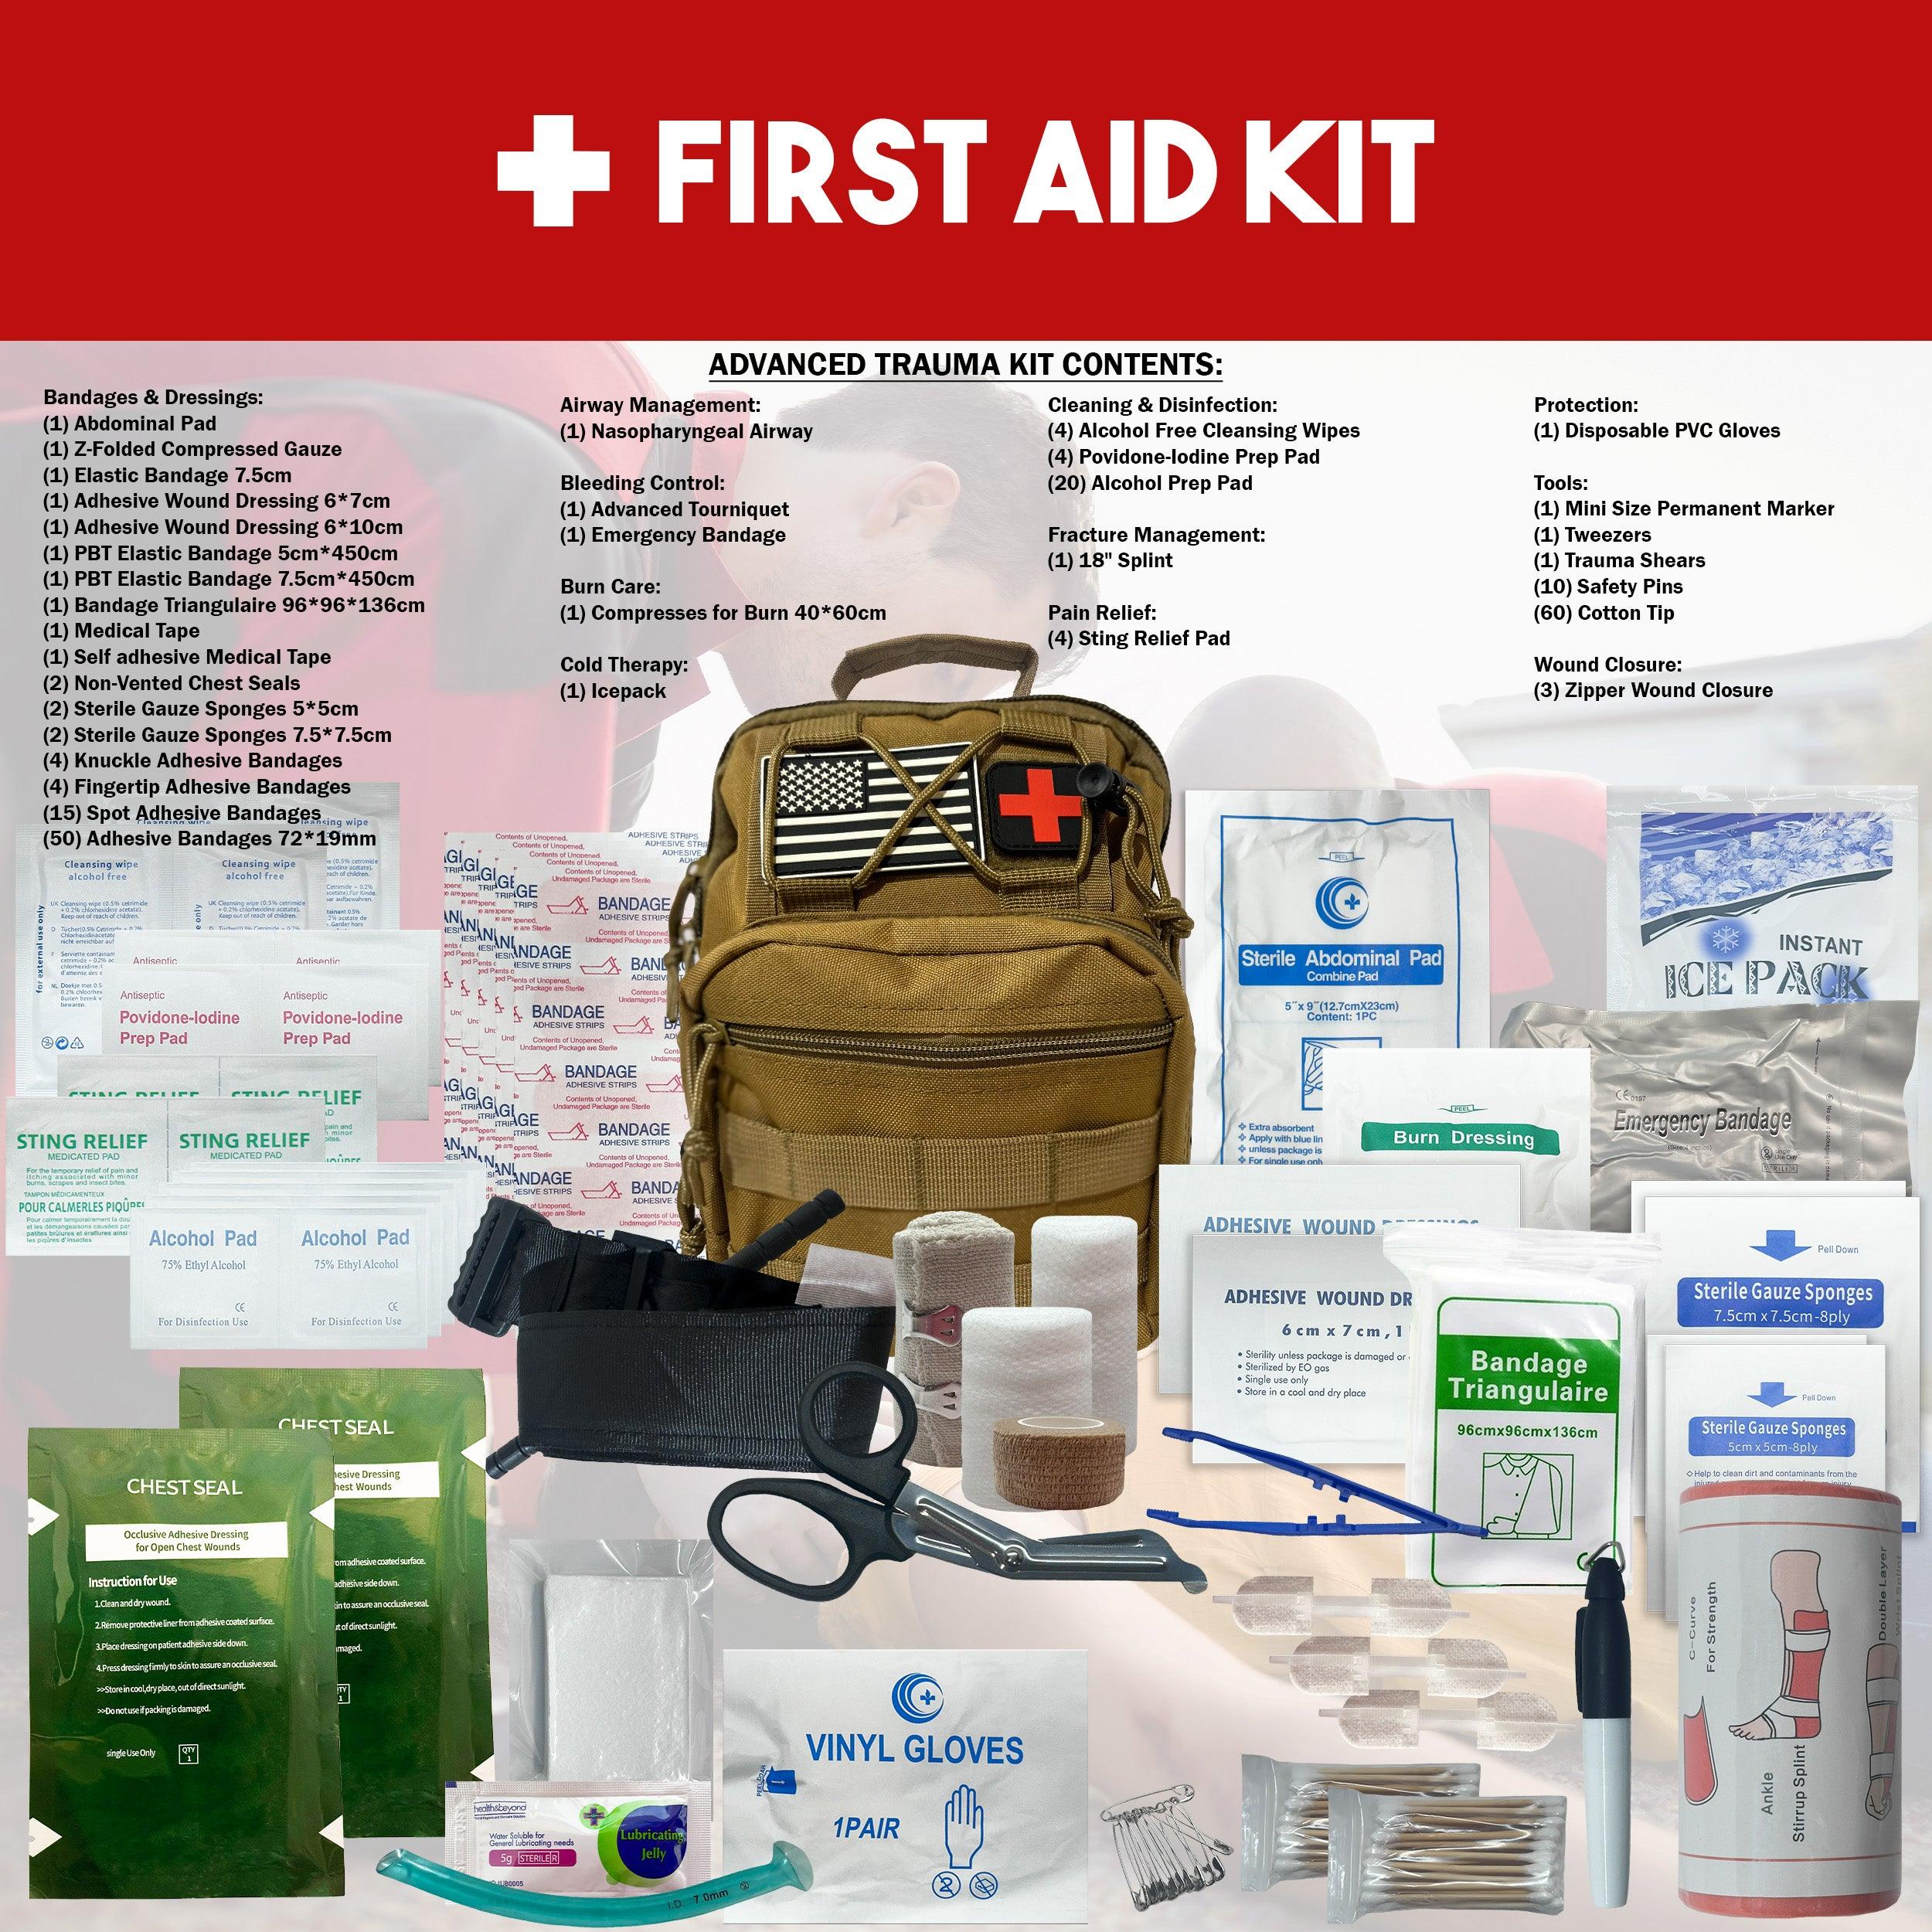 Premium 2 Person 72 Hour Survival Bug Out Bag Backpack with First Aid Kit and Survival Kit - Denver Survival - survival backpack survival gear survival supplies survival equipment